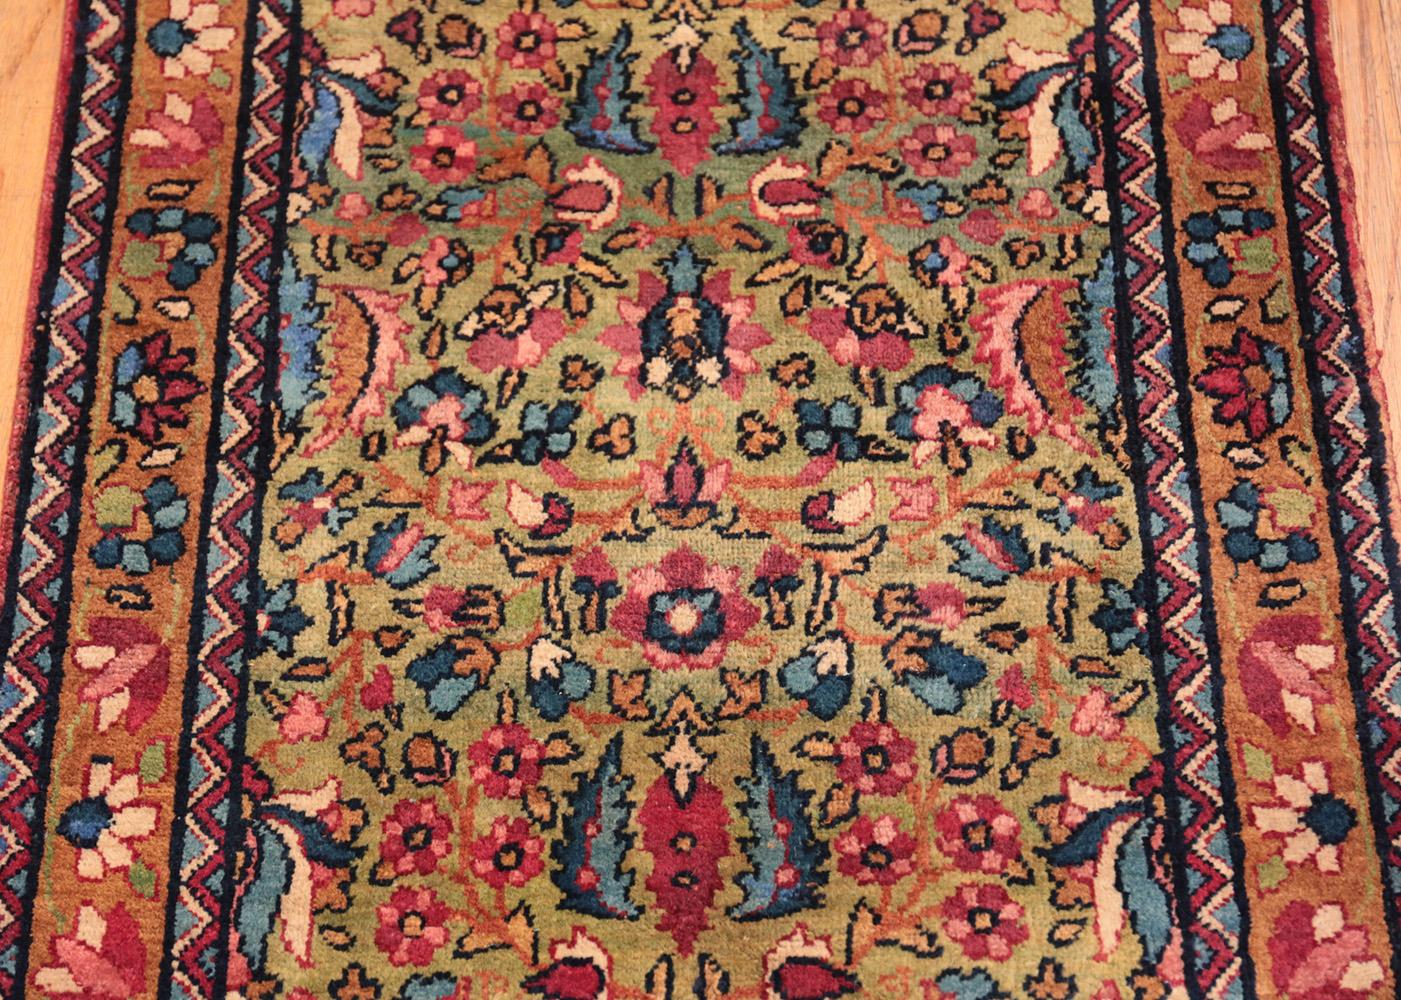 Antique Persian Kerman runner rug, country of origin: Persia, circa date: 1920. Size: 2 ft 2 in x 22 ft 6 in (0.66 m x 6.86 m)

The spectacular jewel tone colors of this impressive 22 foot long Kerman antique runner rug add a touch of decadence to a